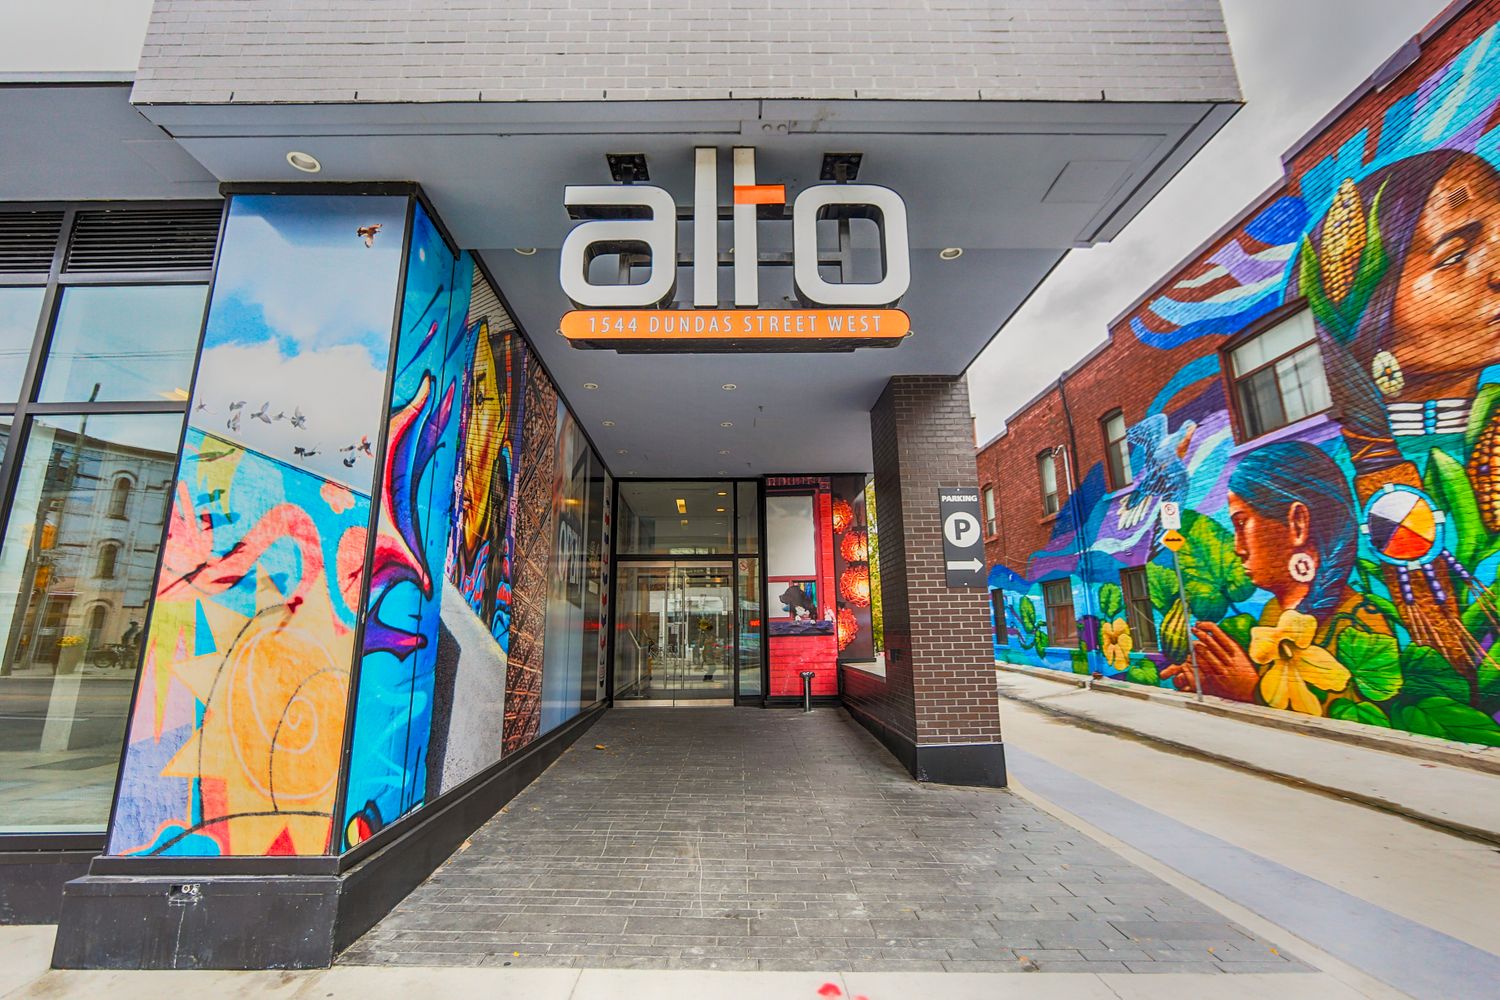 1544 Dundas Street W. Alto is located in  West End, Toronto - image #4 of 4